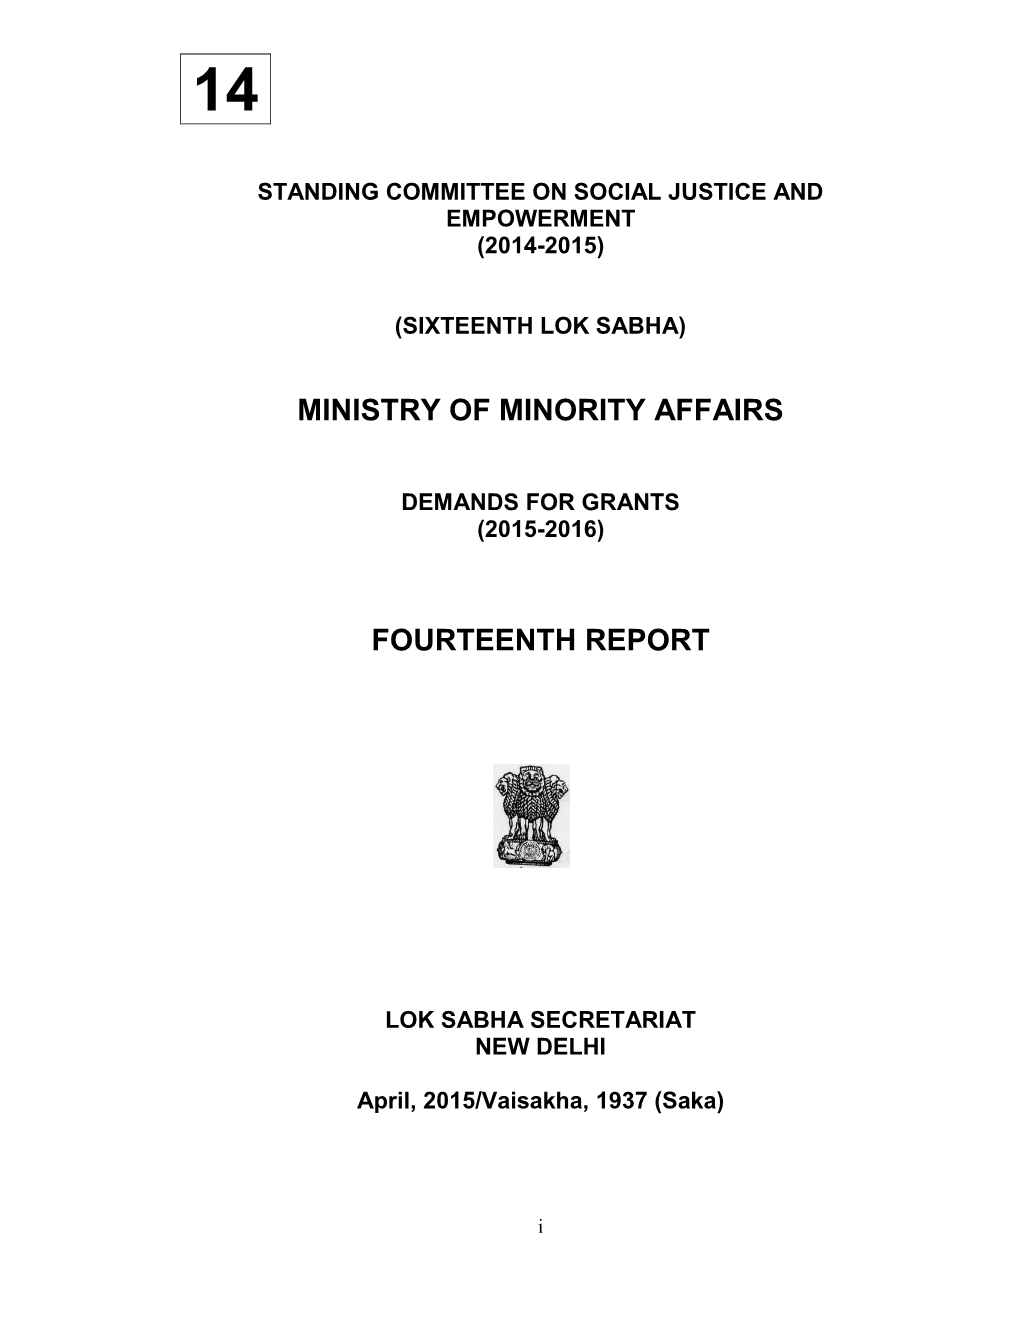 Ministry of Minority Affairs Fourteenth Report